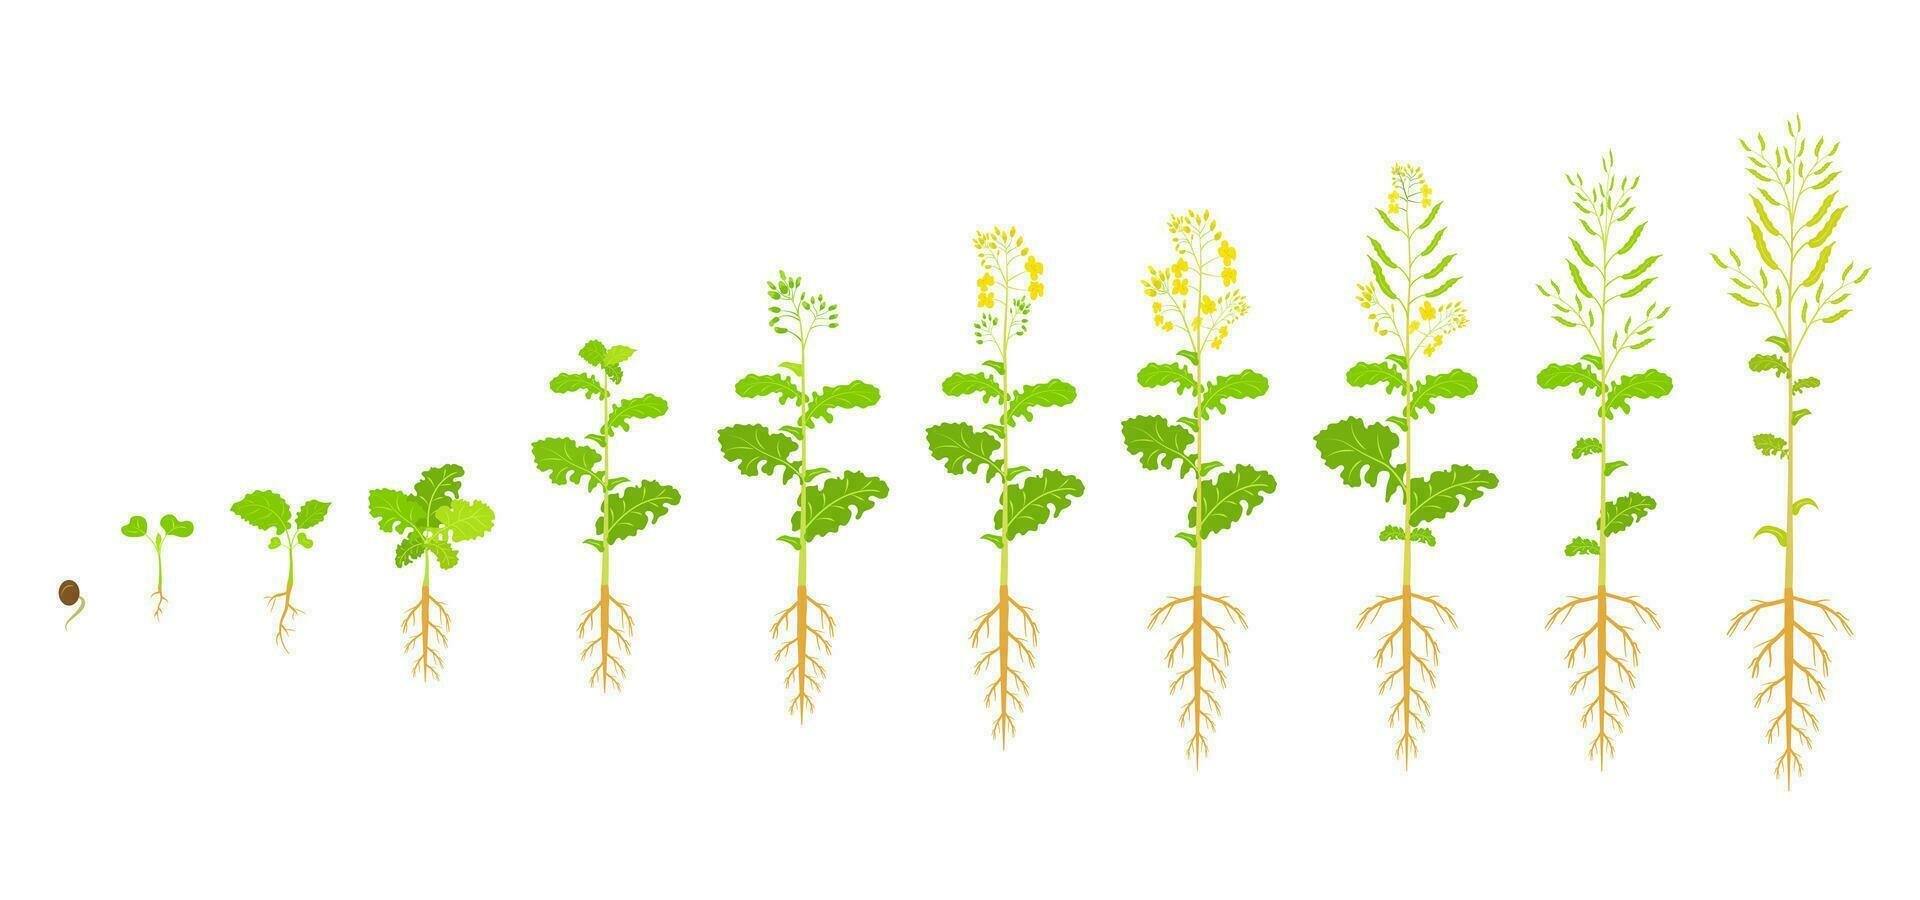 Canola growth cycle. Phases of rapeseed development. Vector illustration growing seedlings.